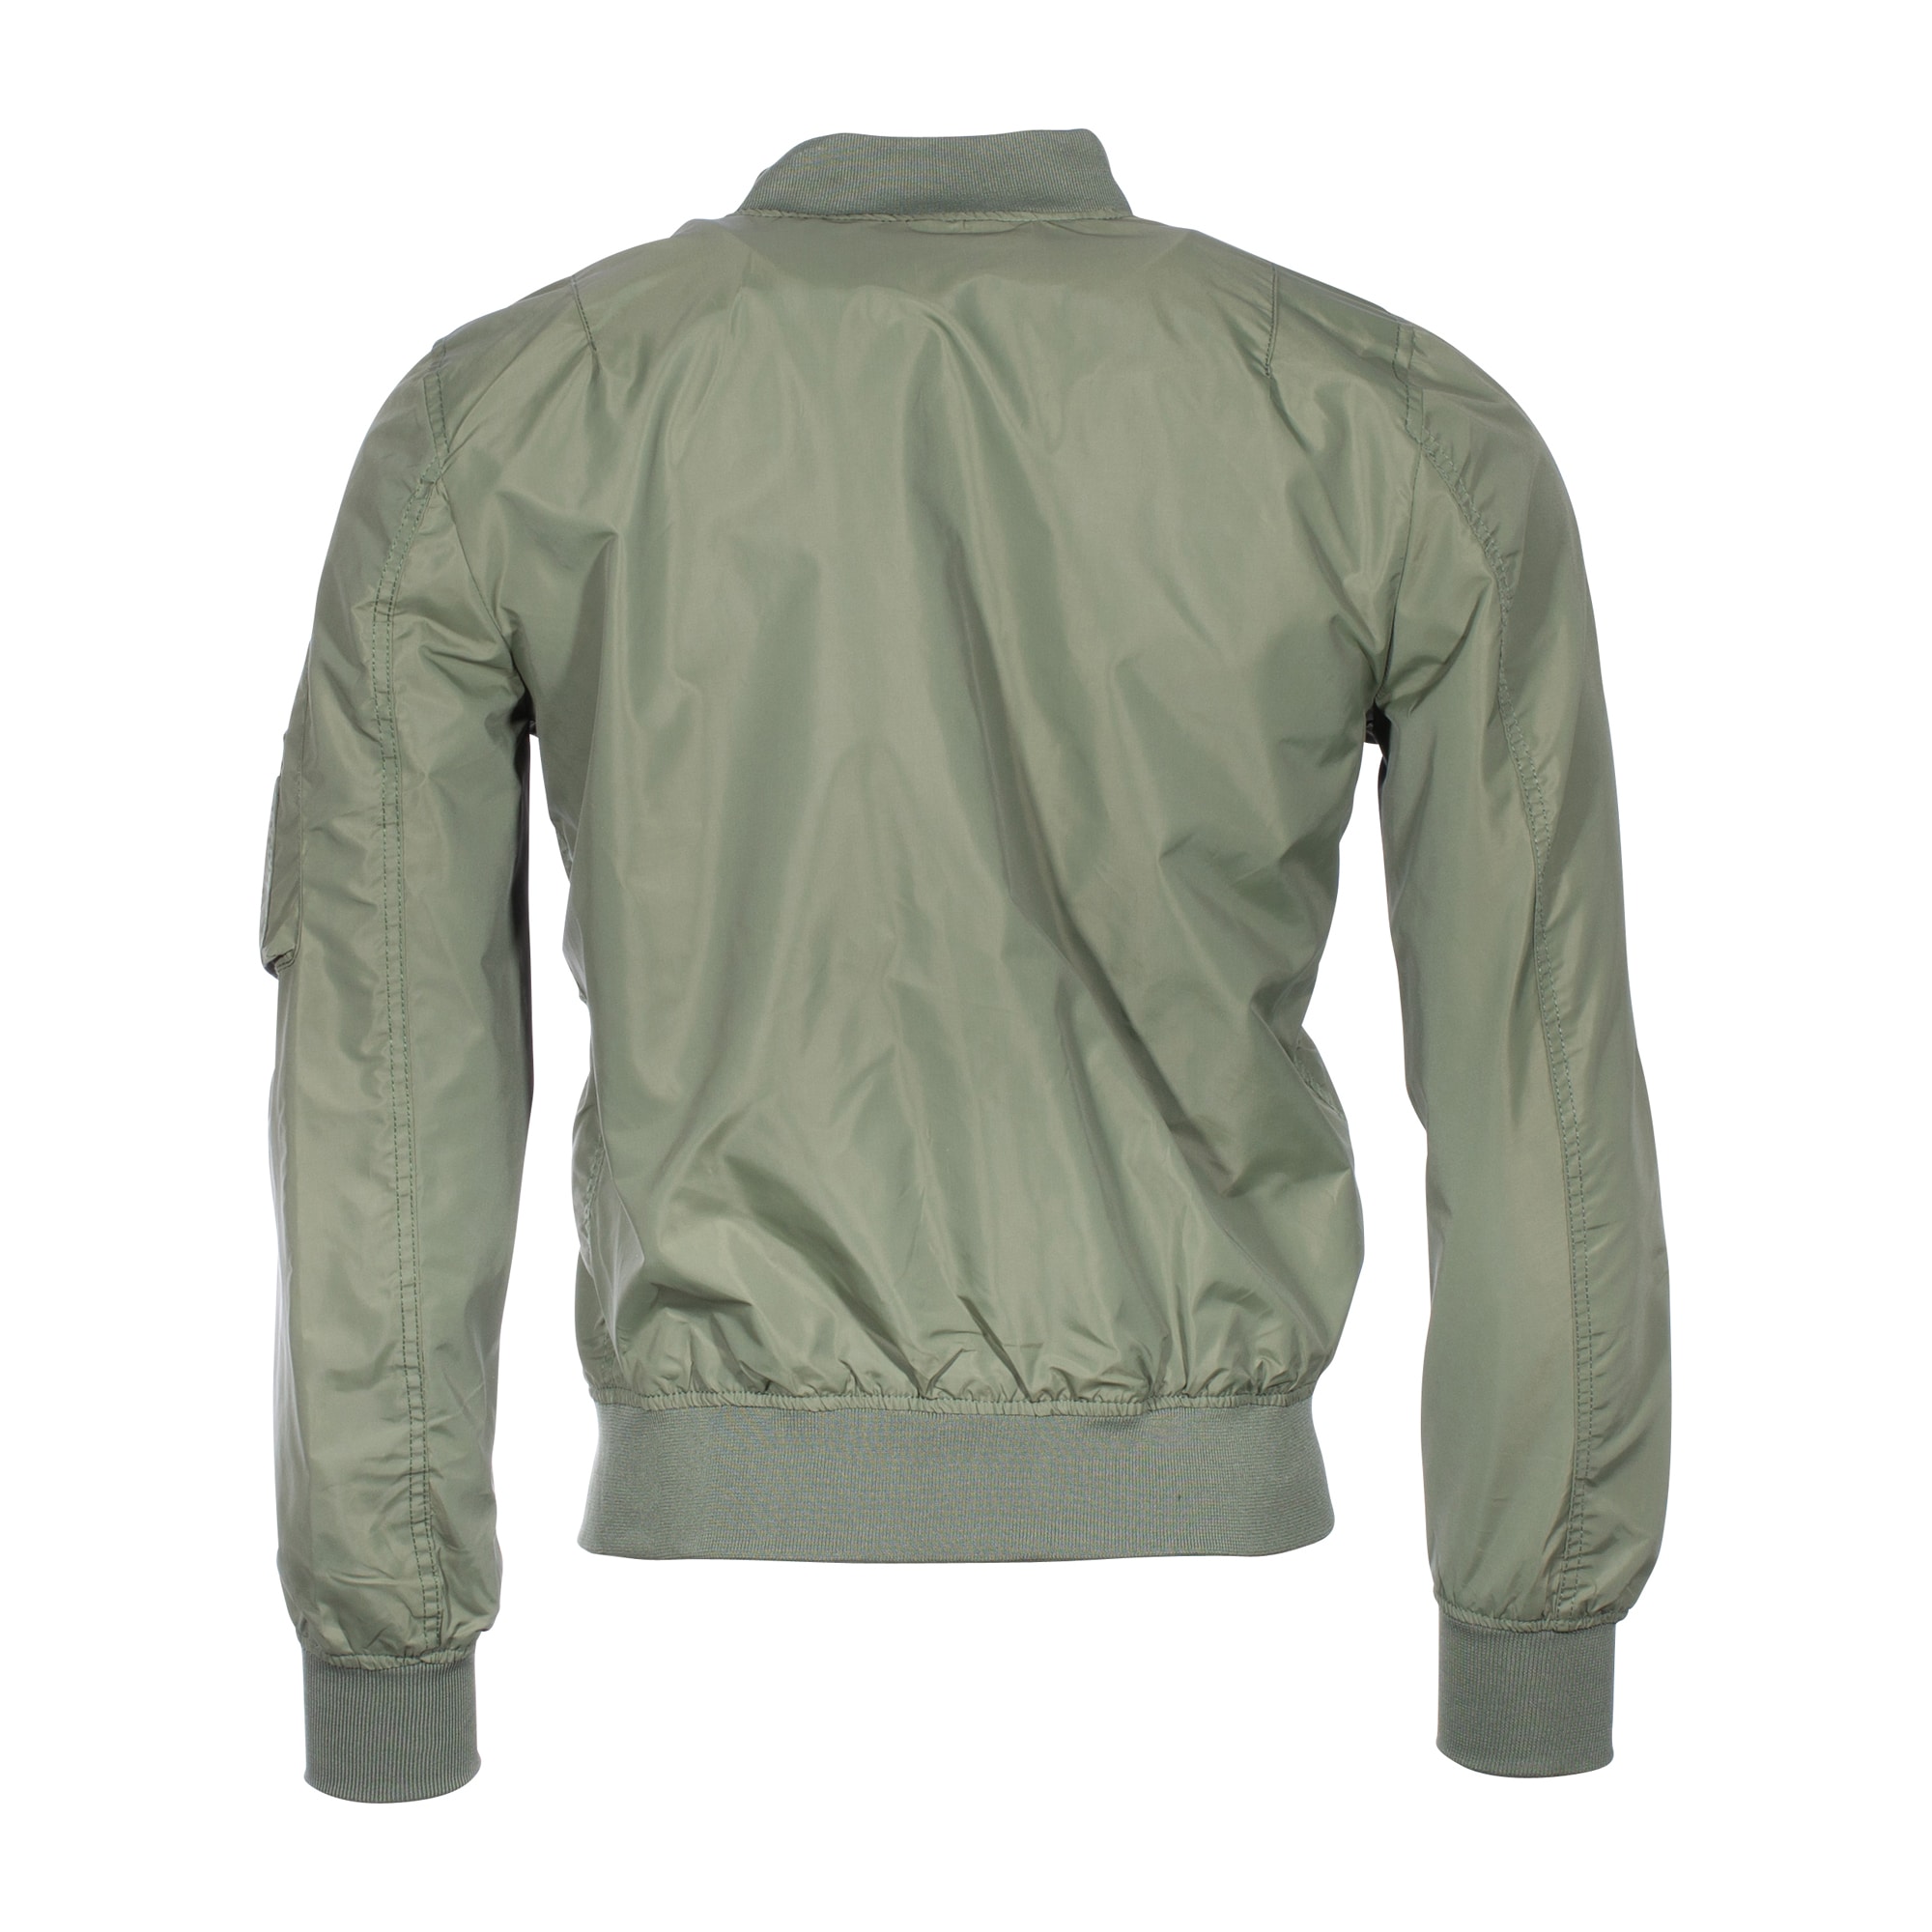 Purchase the Mil-Tec Jacket olive by Summer MA1 Flight ASMC